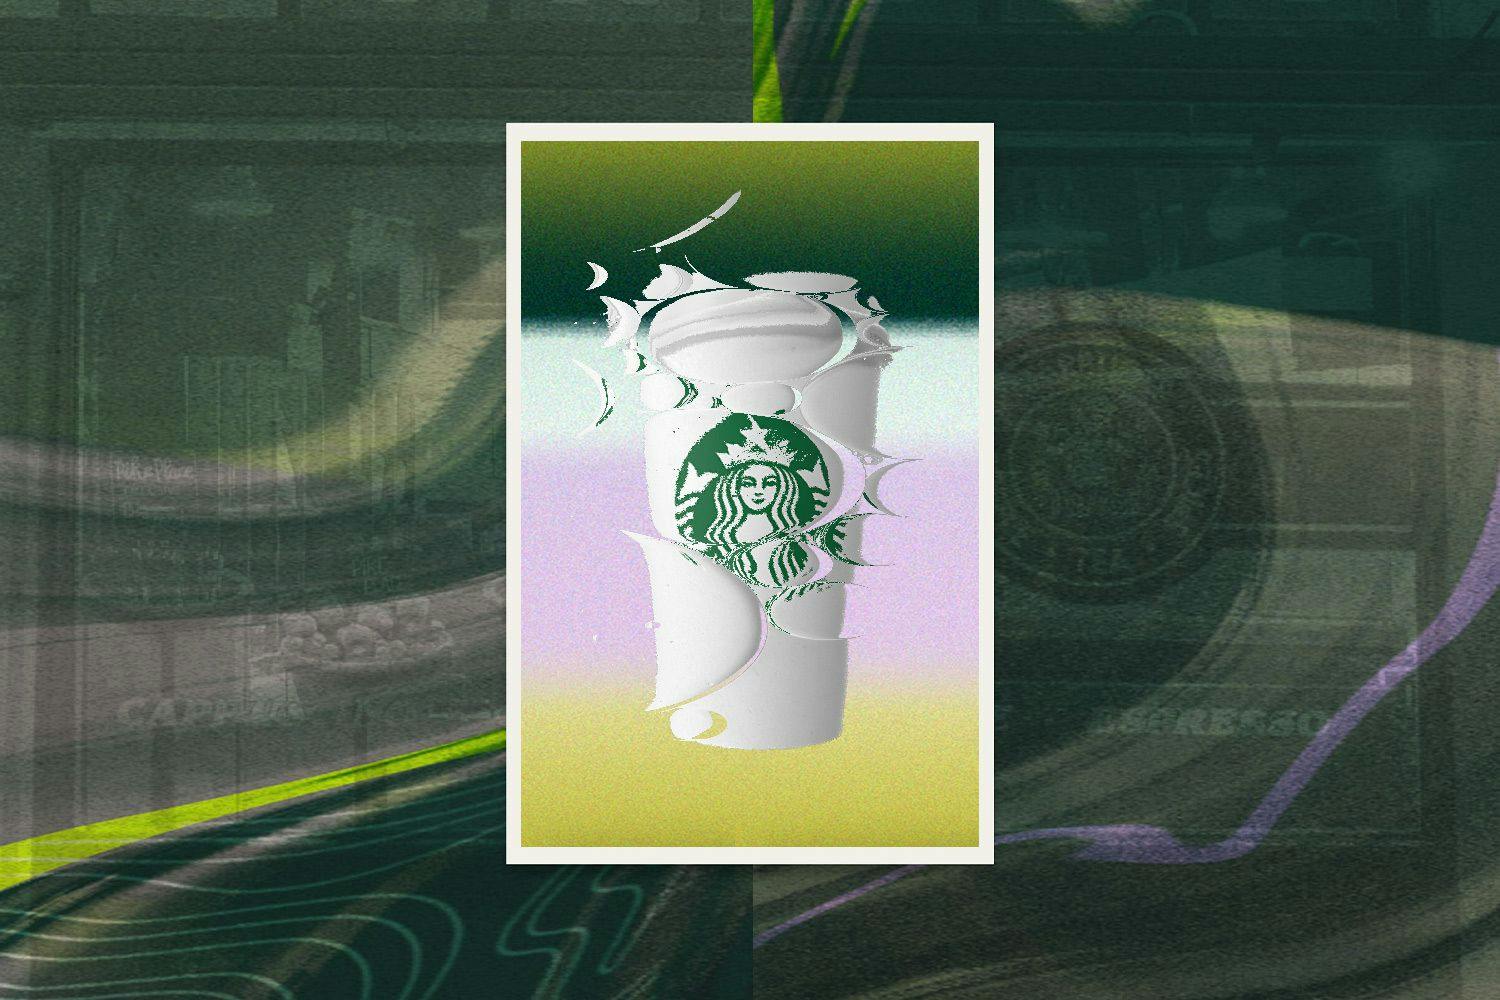 A Starbucks cup coming apart against an abstract background